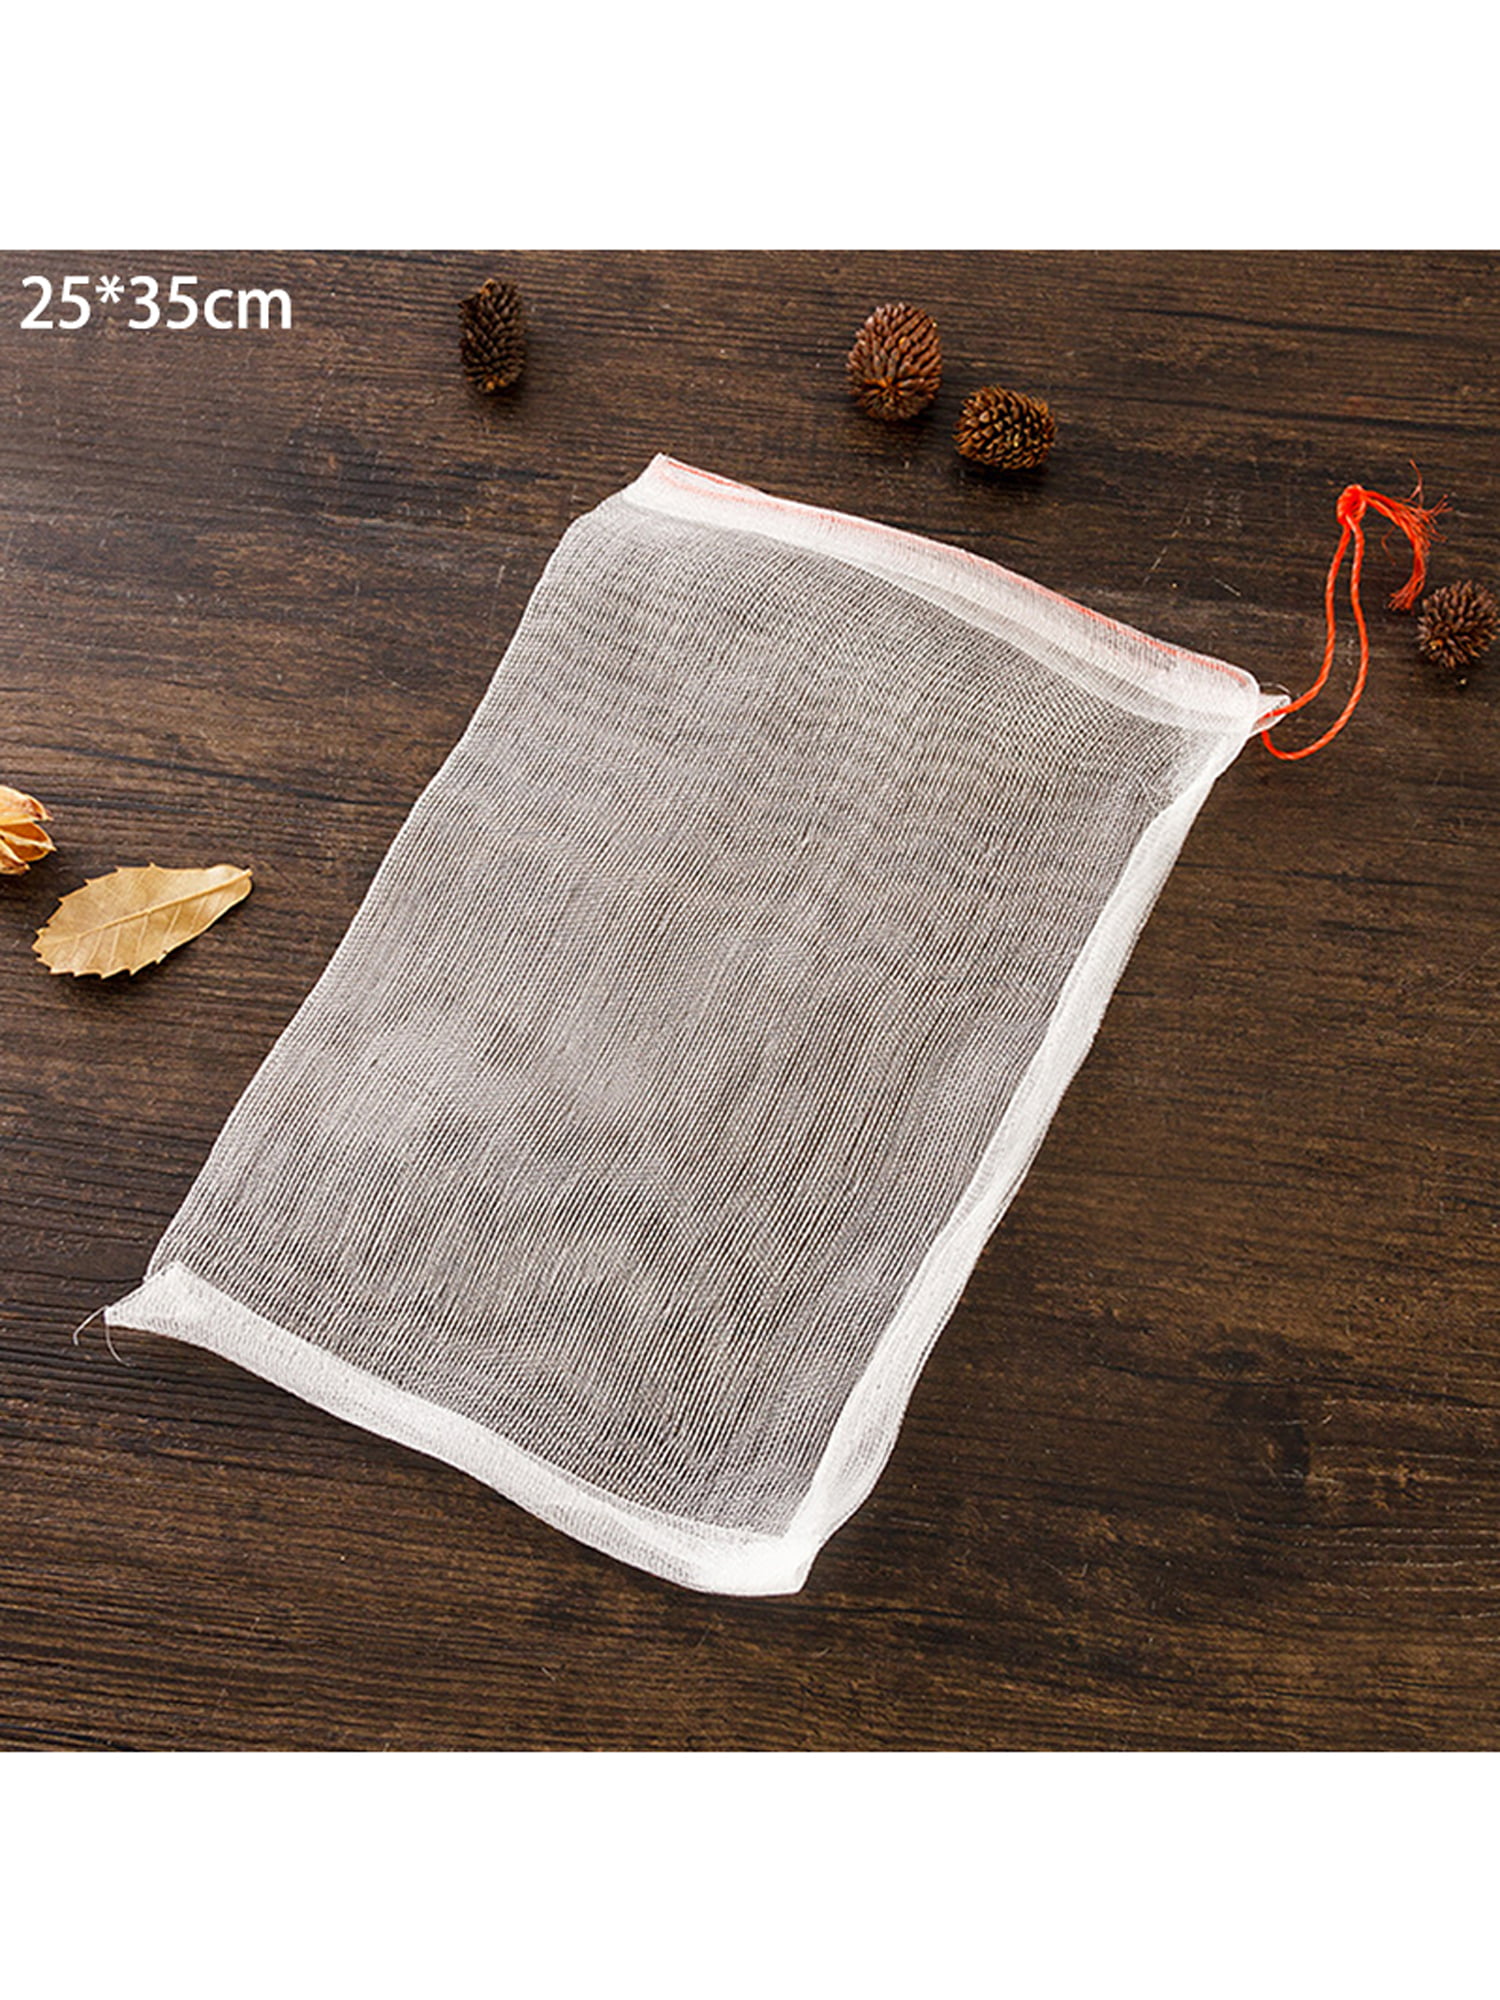 50 in1 Garden Plant Fruit Protect Drawstring Net Mesh Bags Anti Insect Pest Bird 